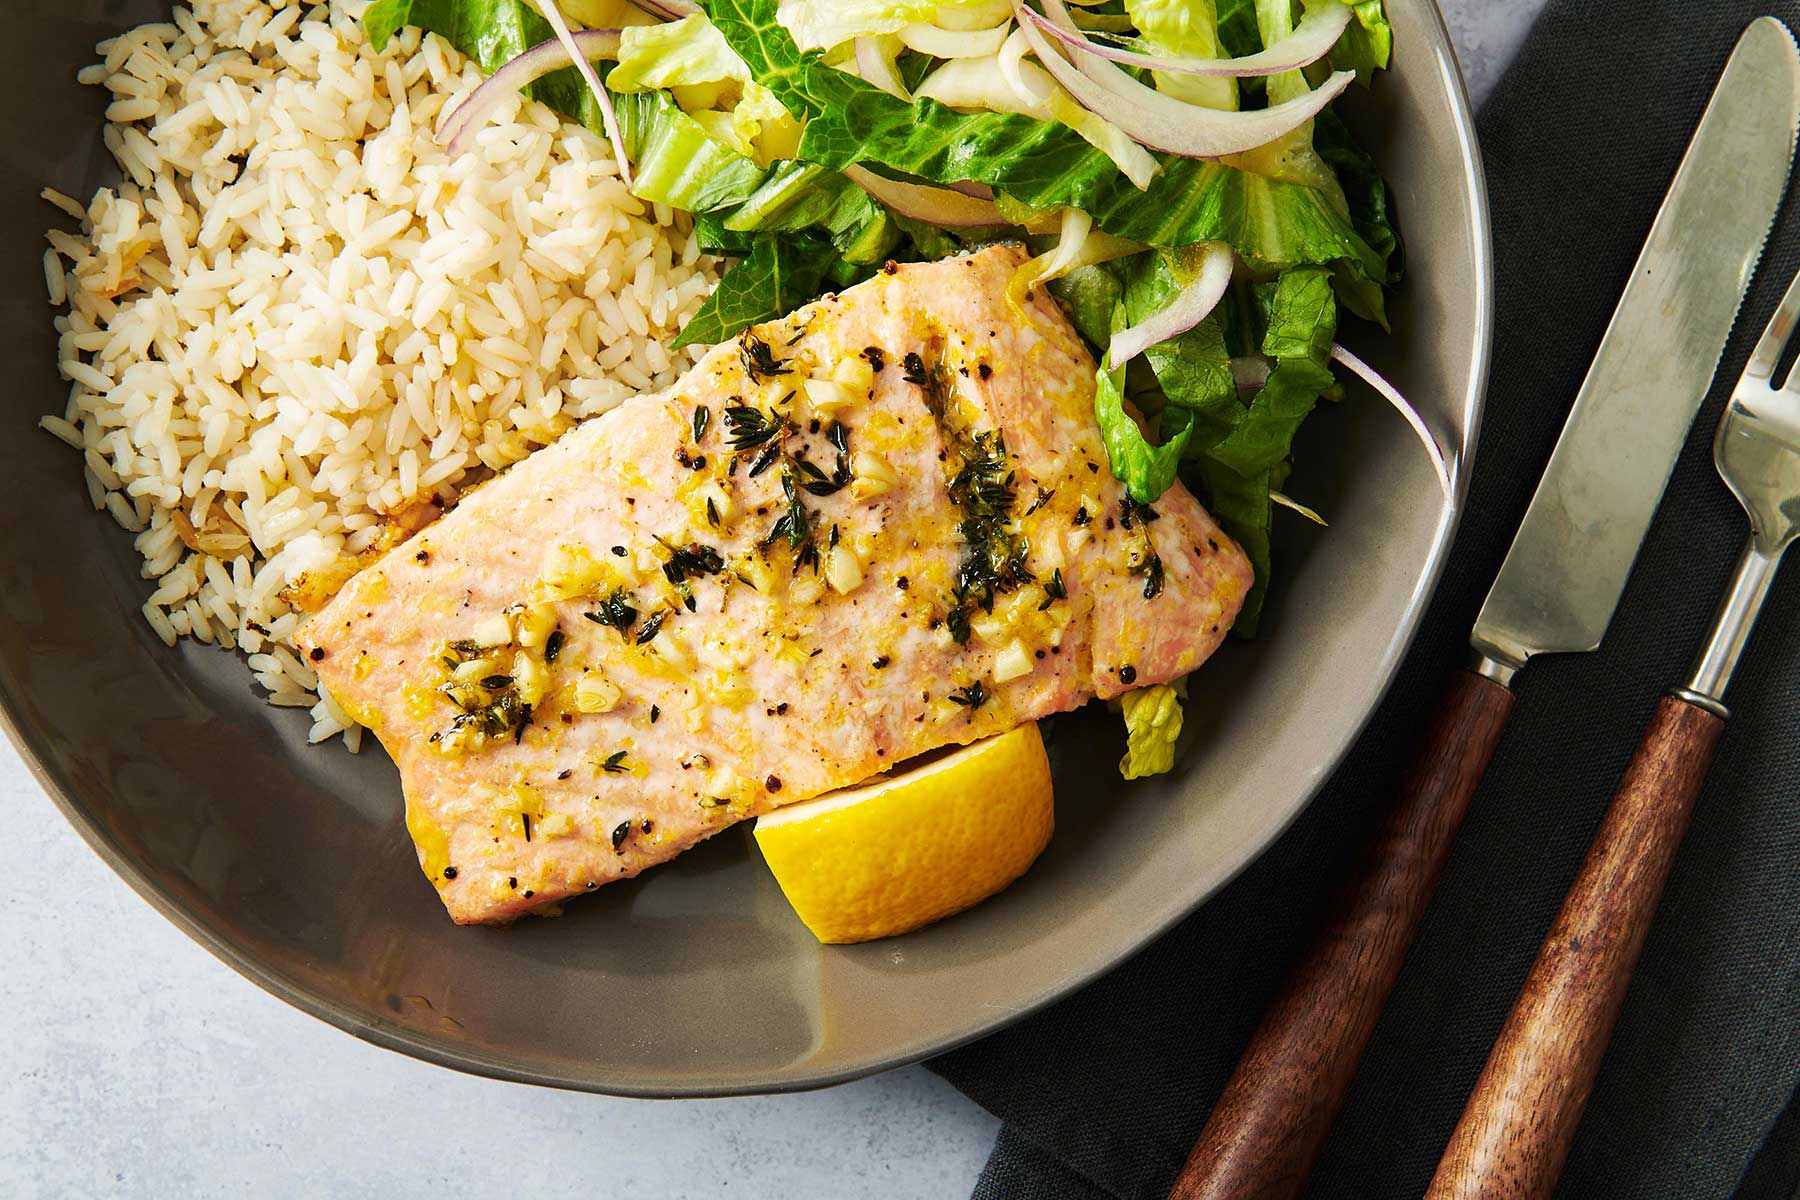 Marinated salmon on a plate with rice, salad, and a lemon wedge.